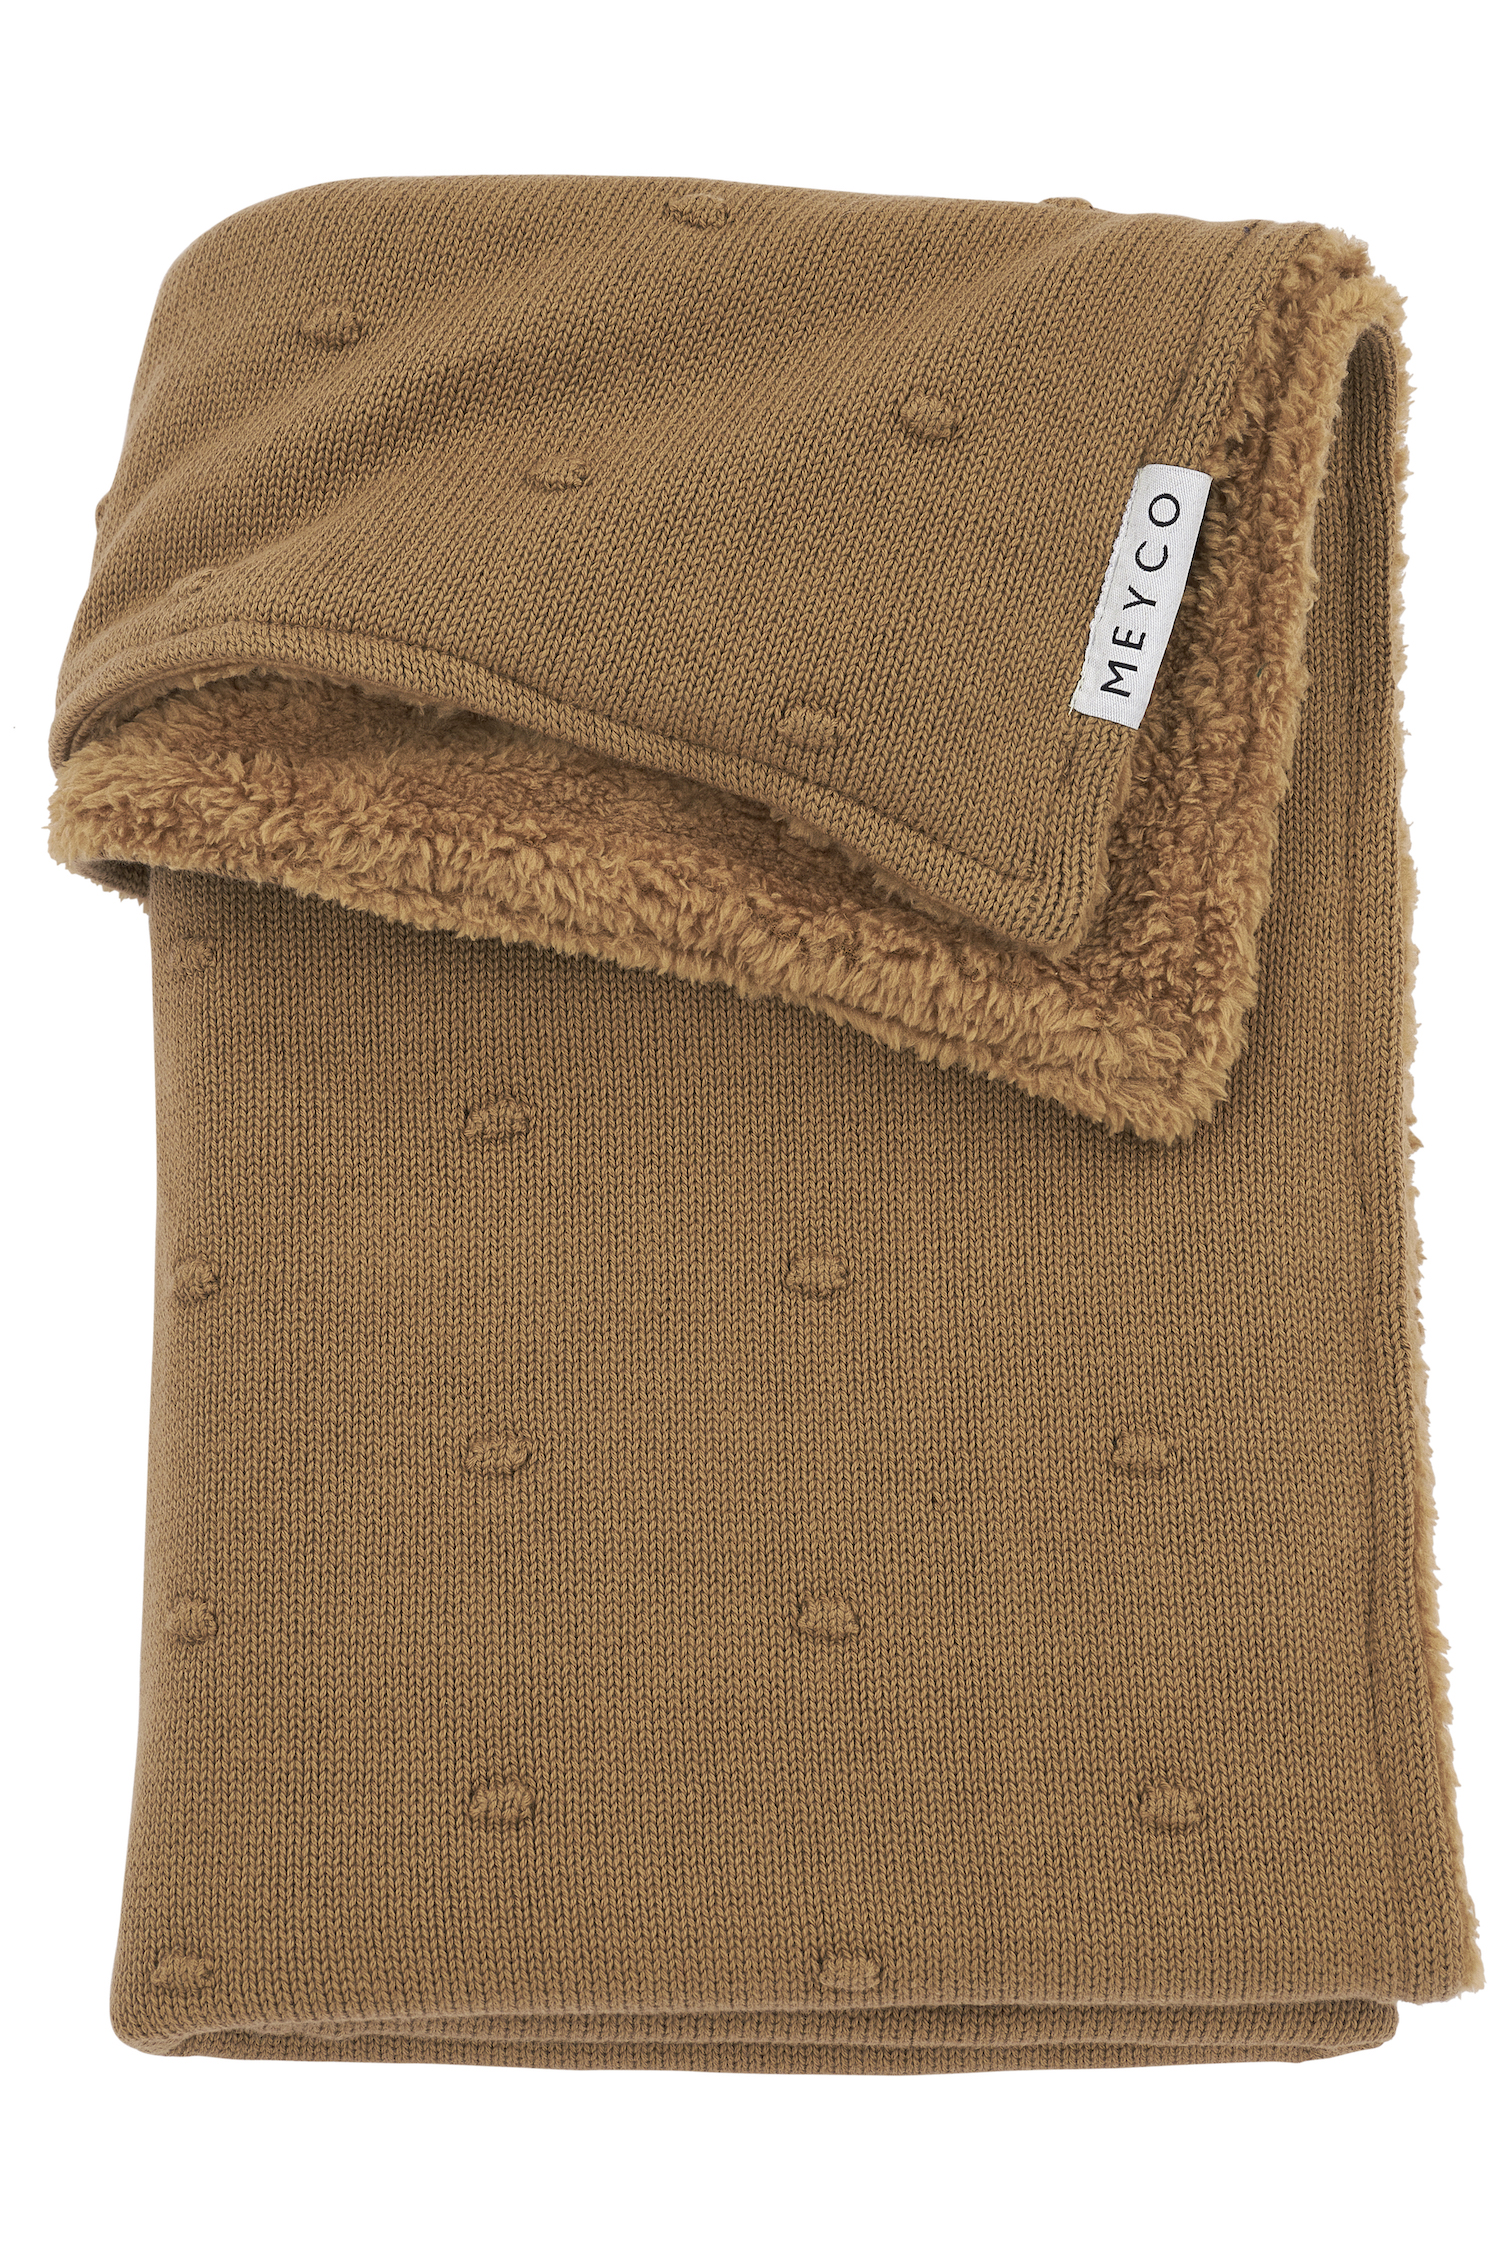 Cot Bed Blanket Mini Knots Teddy - Toffee - 100x150cm